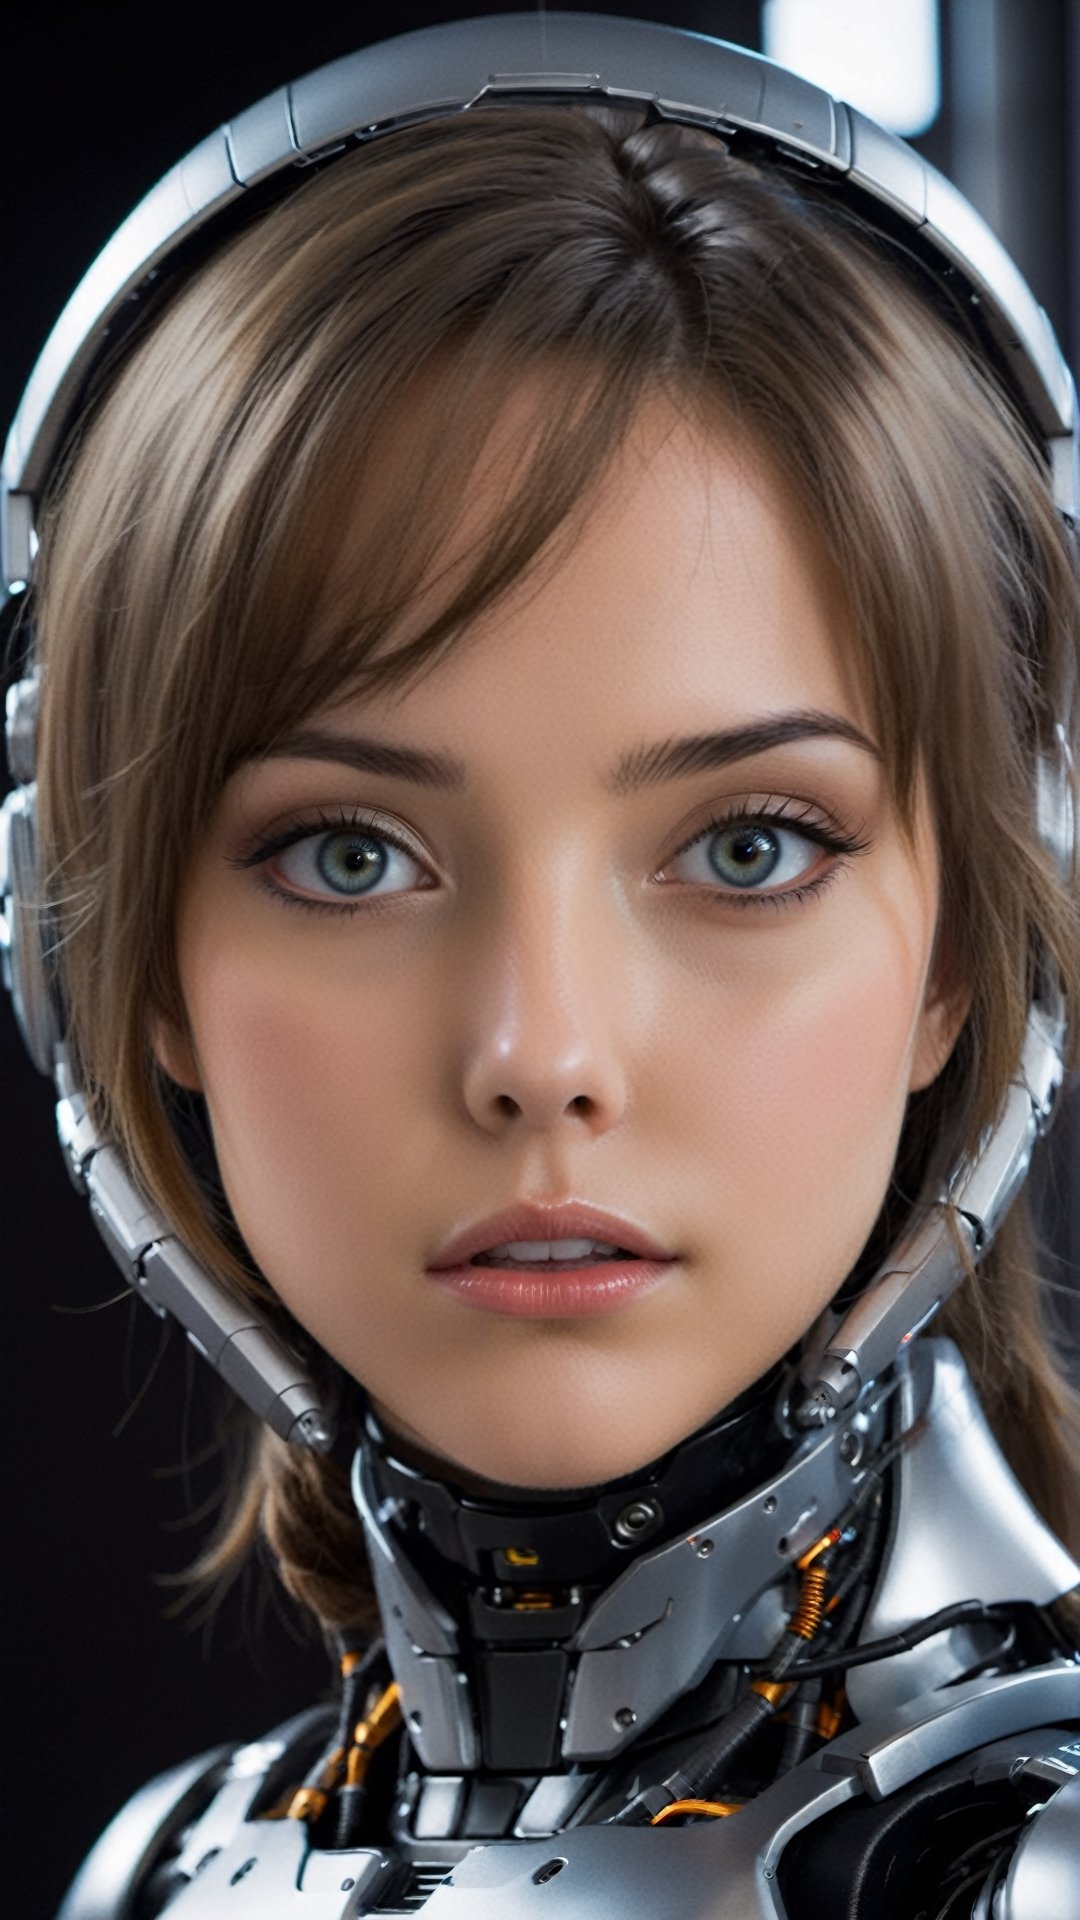 1 girl , cute girl, pretty eyes , Grey Pupils , calm blank face , open lips , Sci-fi, ultra high res, futuristic , {(little robot)}, {(solo)}, face close up , {(Pure Shadow black background ,spaceship wall interior background, Mecha parts)}